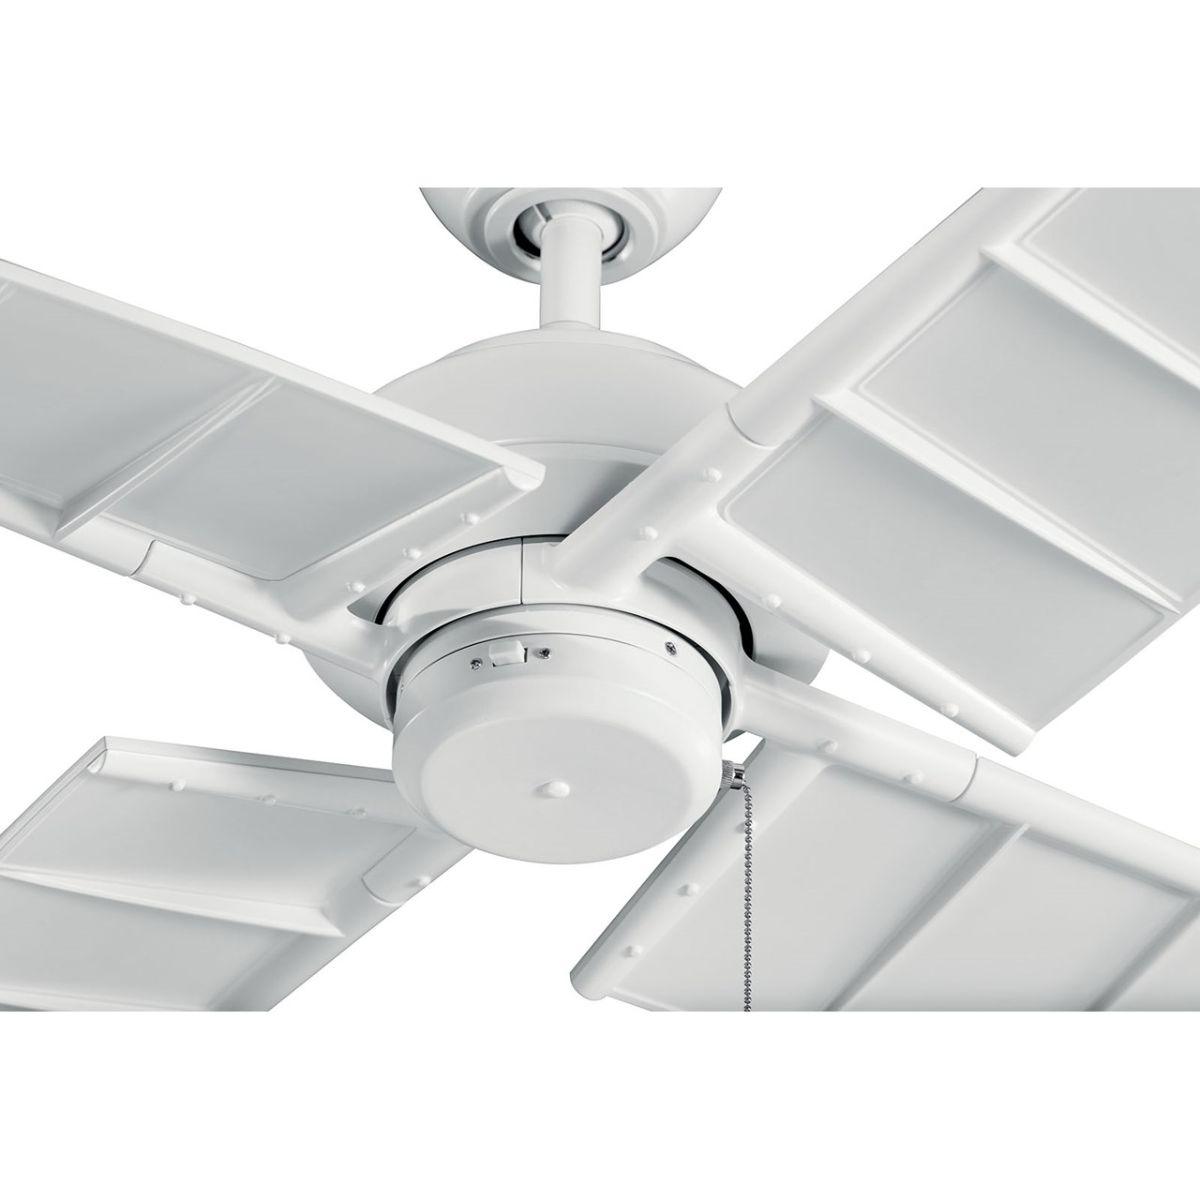 Surrey 60 Inch Outdoor Ceiling Fan With Pull Chain, Marine Grade